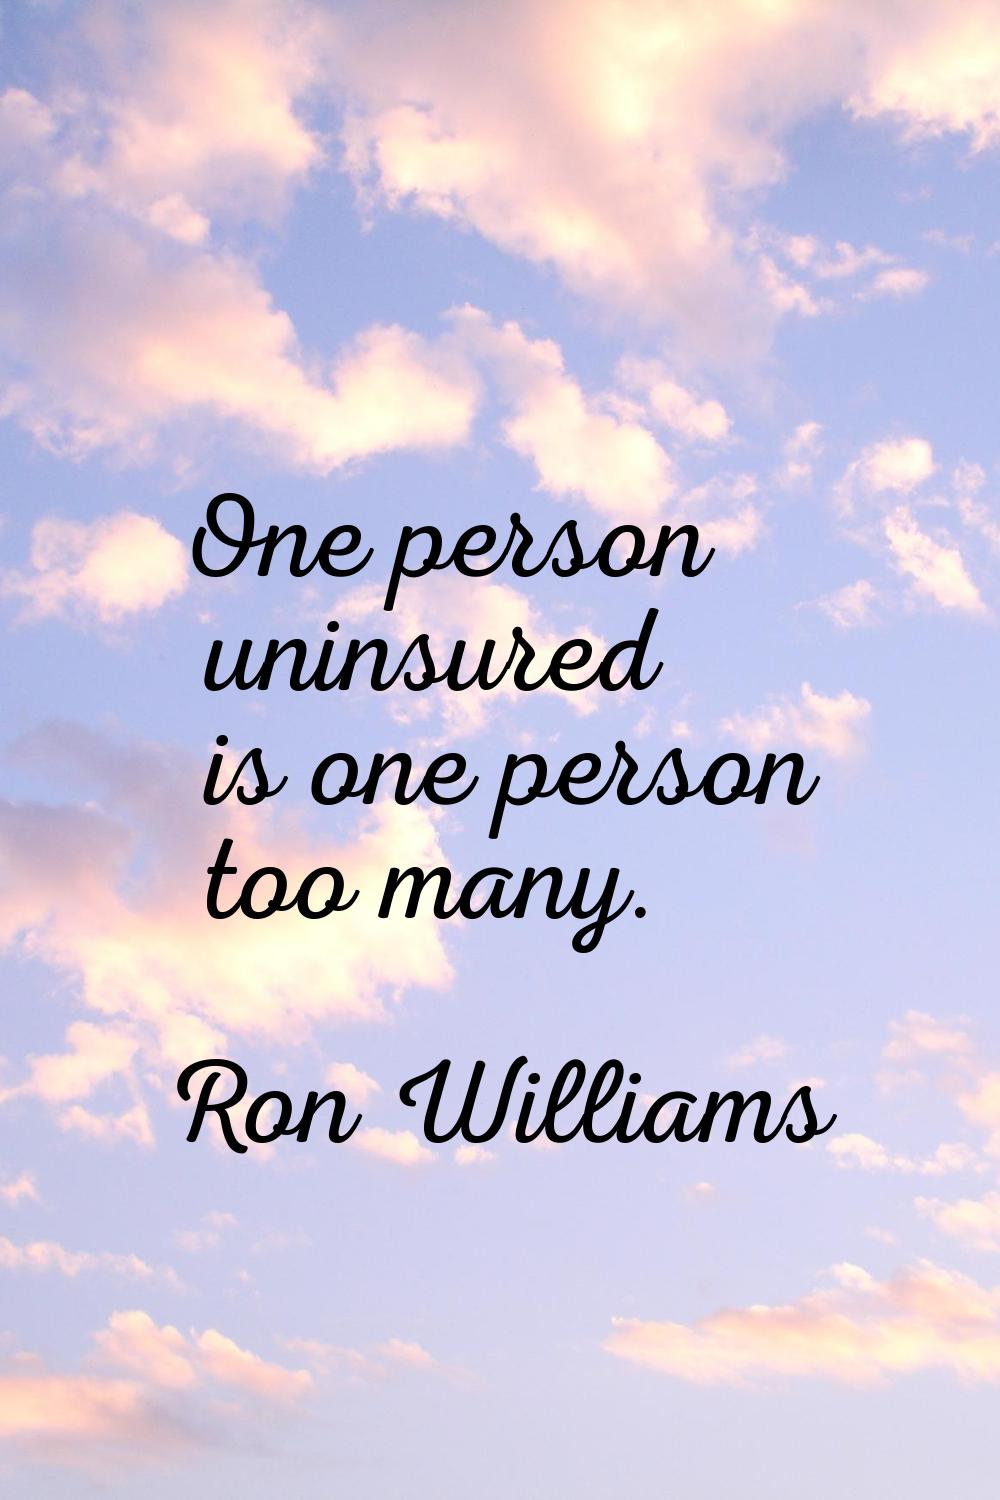 One person uninsured is one person too many.